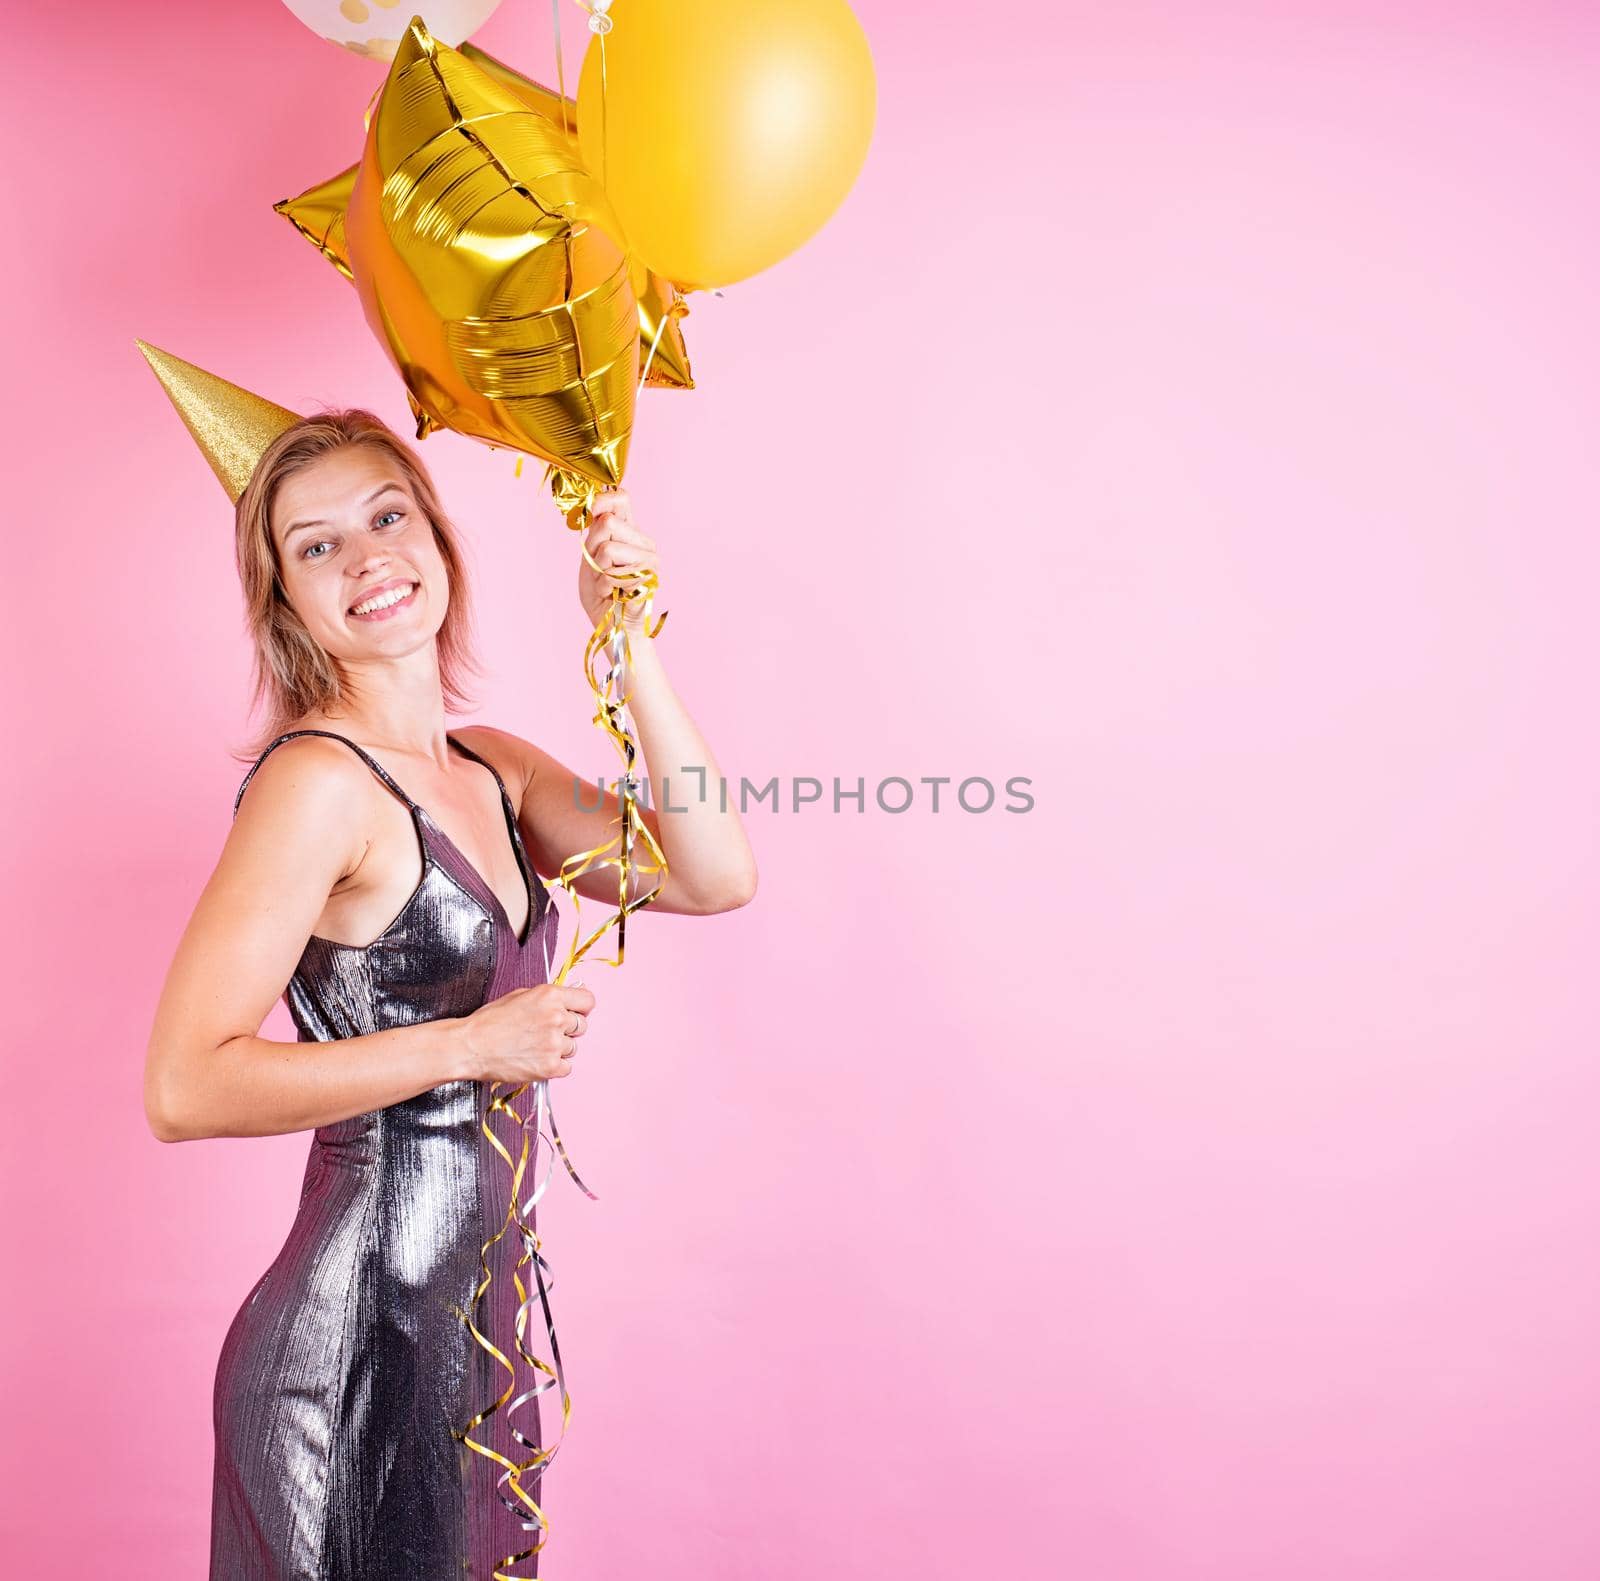 Birthday party. Young blond smiling woman wearing birthday hat holding golden balloons celebrating birthday on pink background with copy space